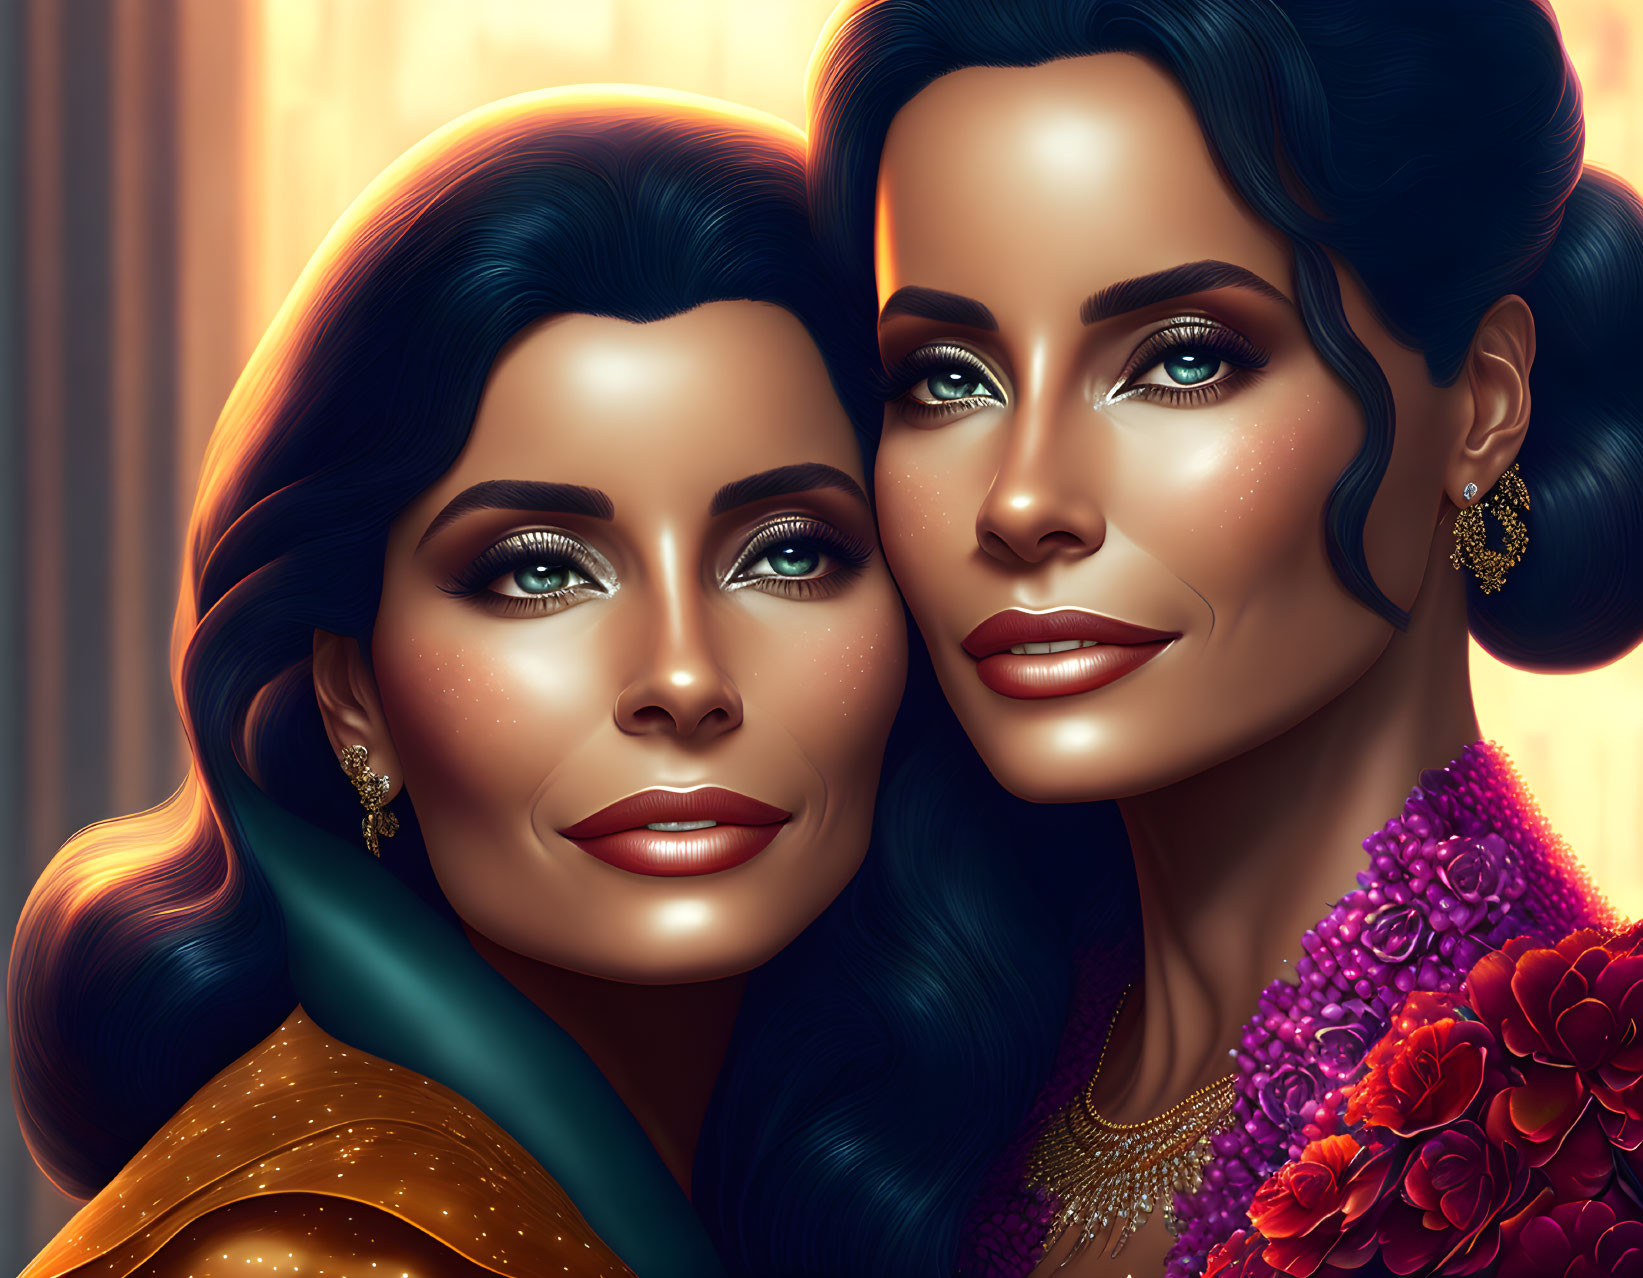 Illustration of two women with dark hair and blue eyes in orange and purple outfits with gold and floral